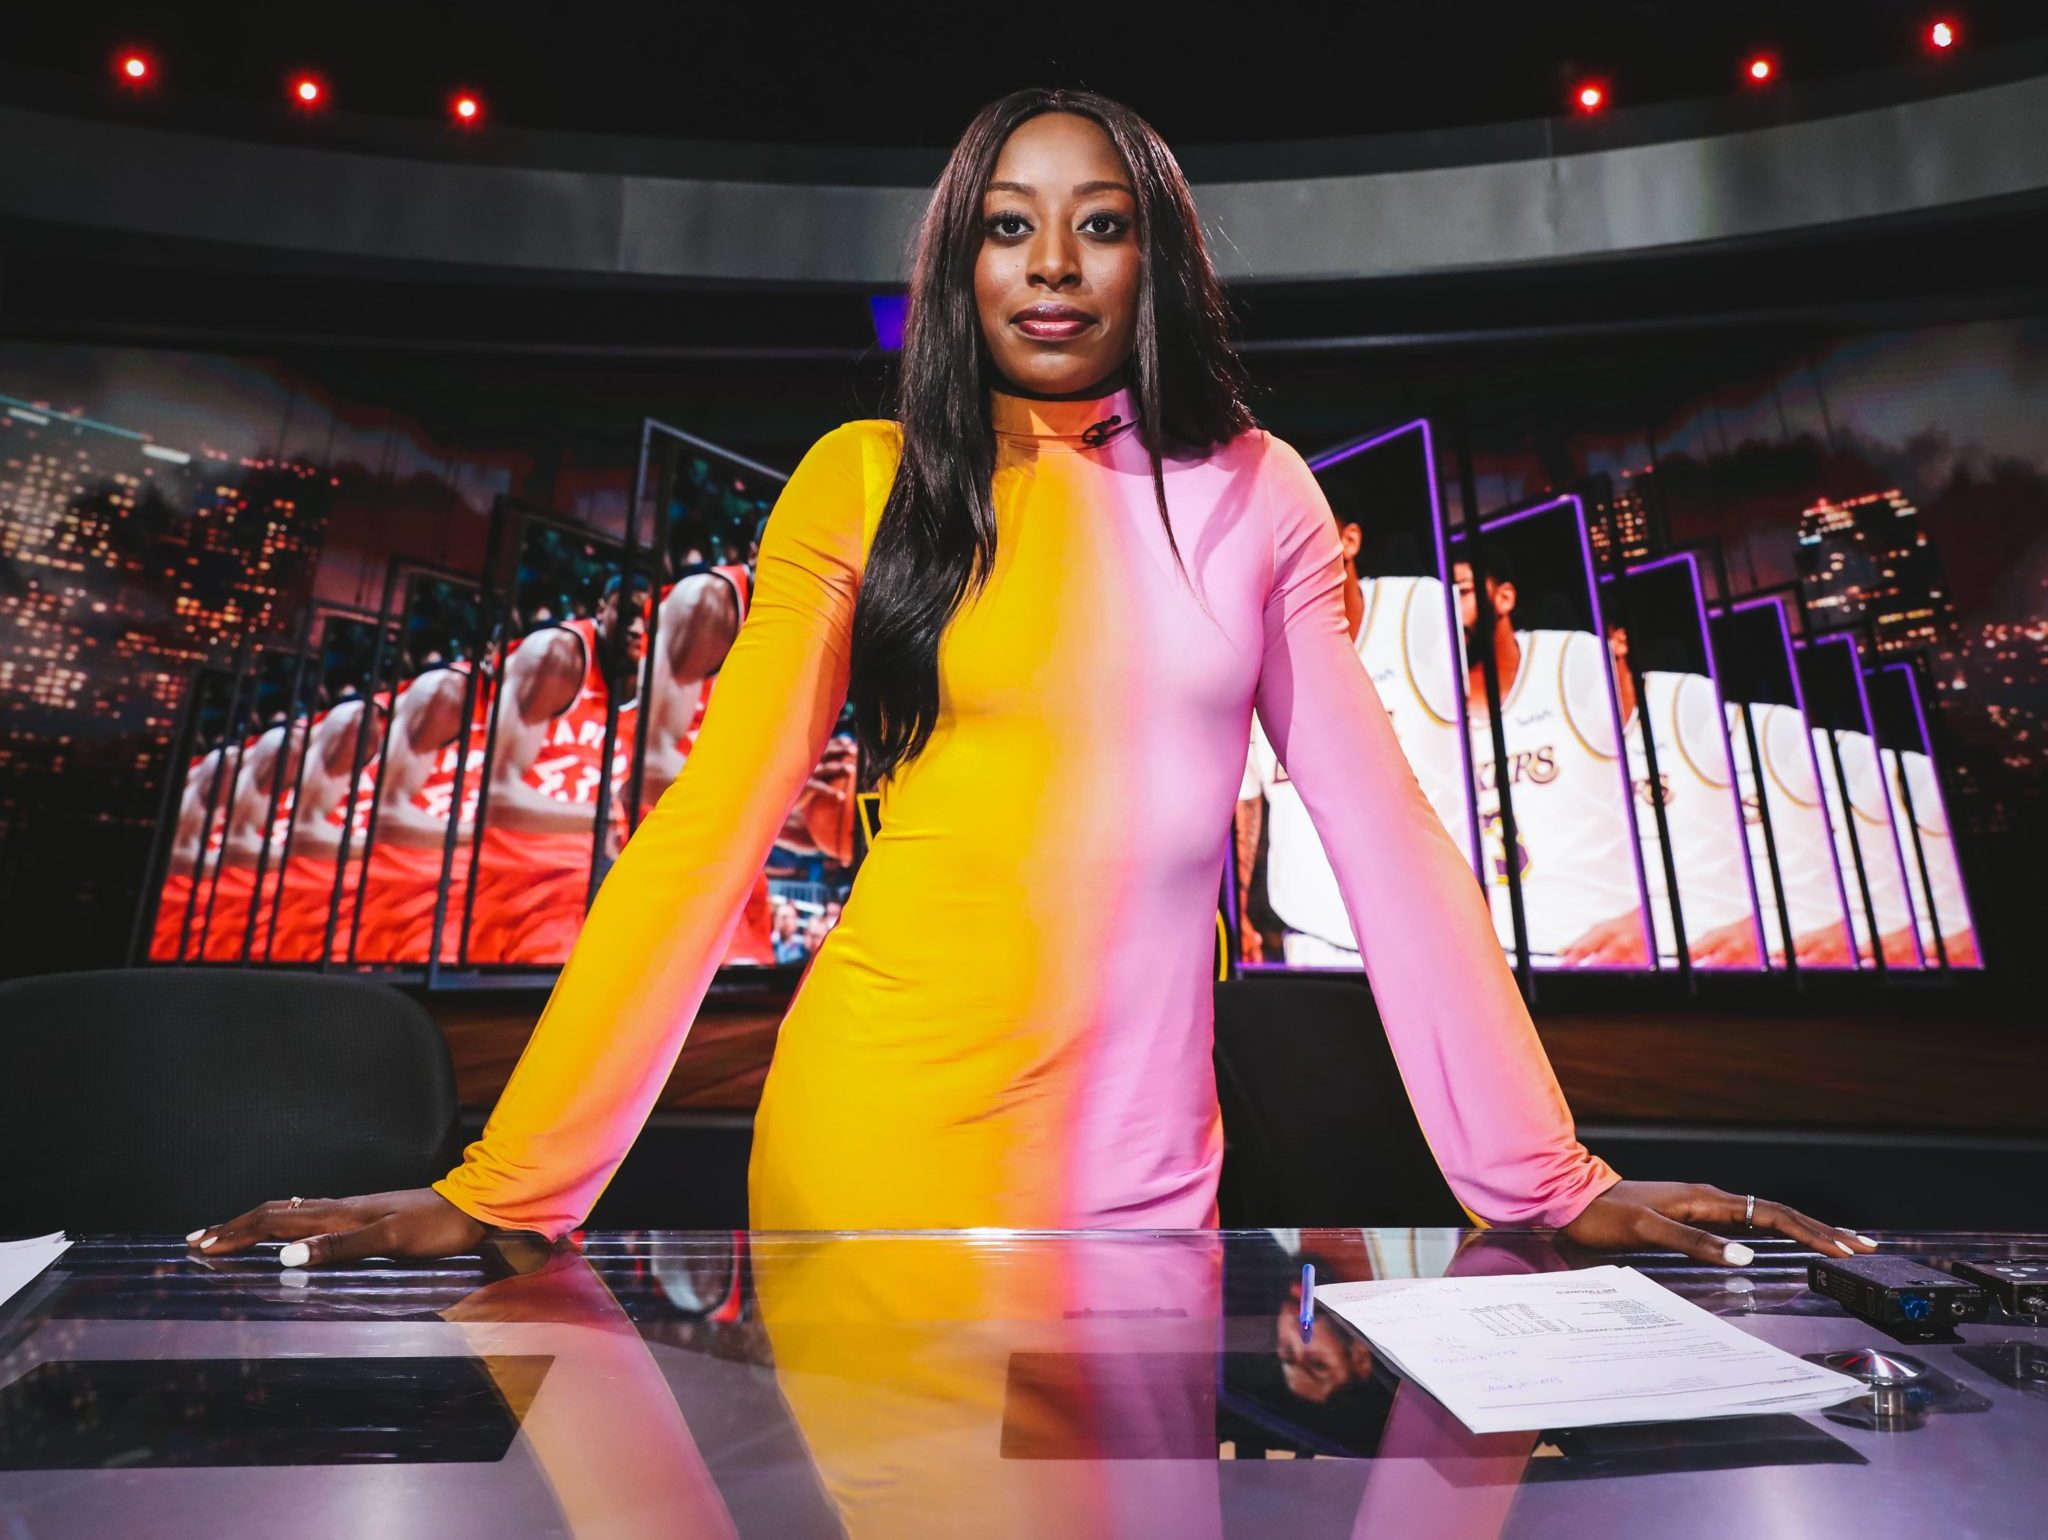 WNBA All-Star Chiney Ogwumike Has Media Game